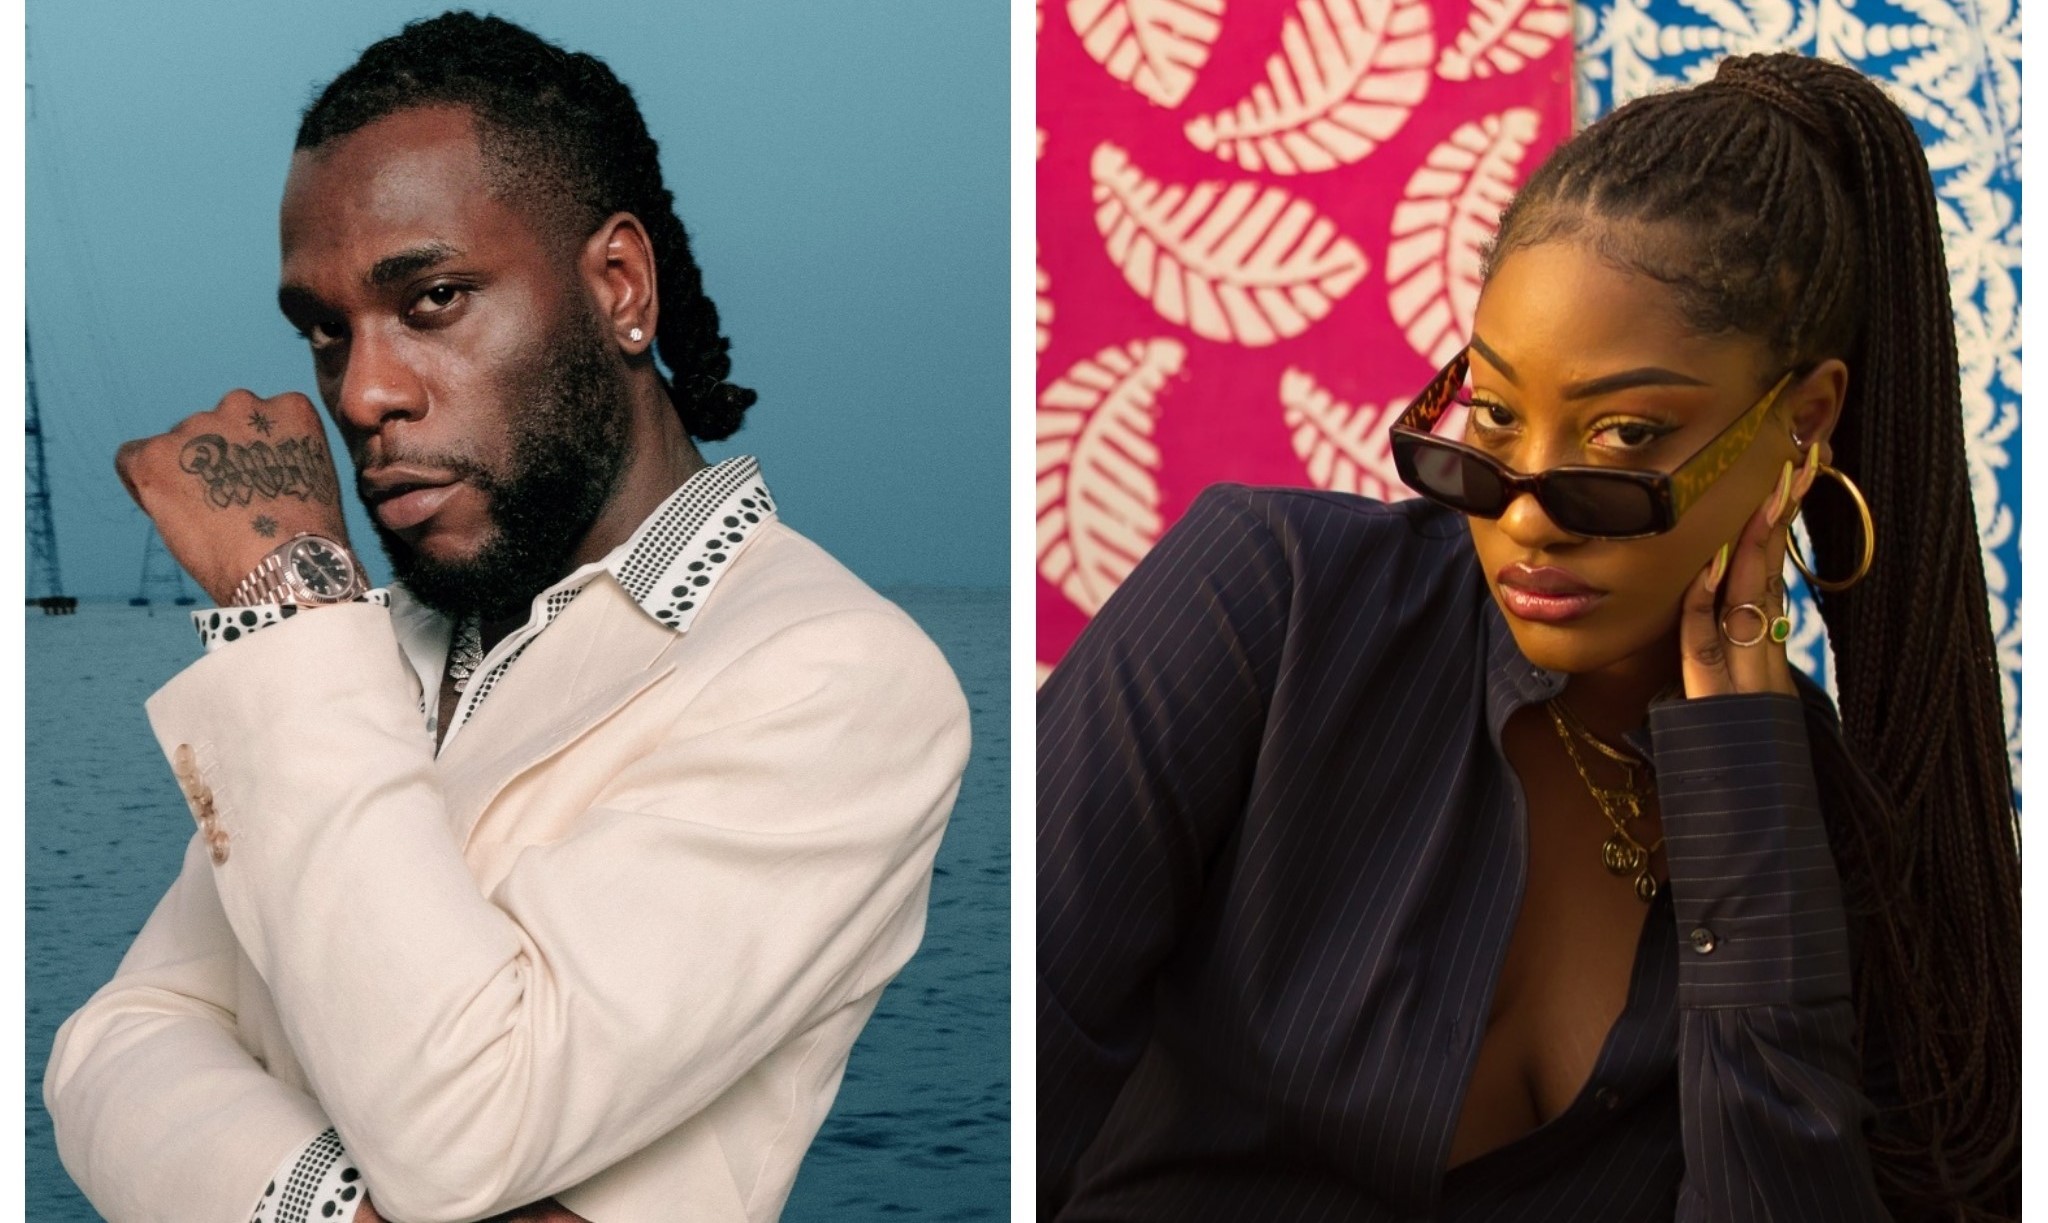 Burna Boy and Tems to perform at 2023 NBA All-Star Game Halftime show